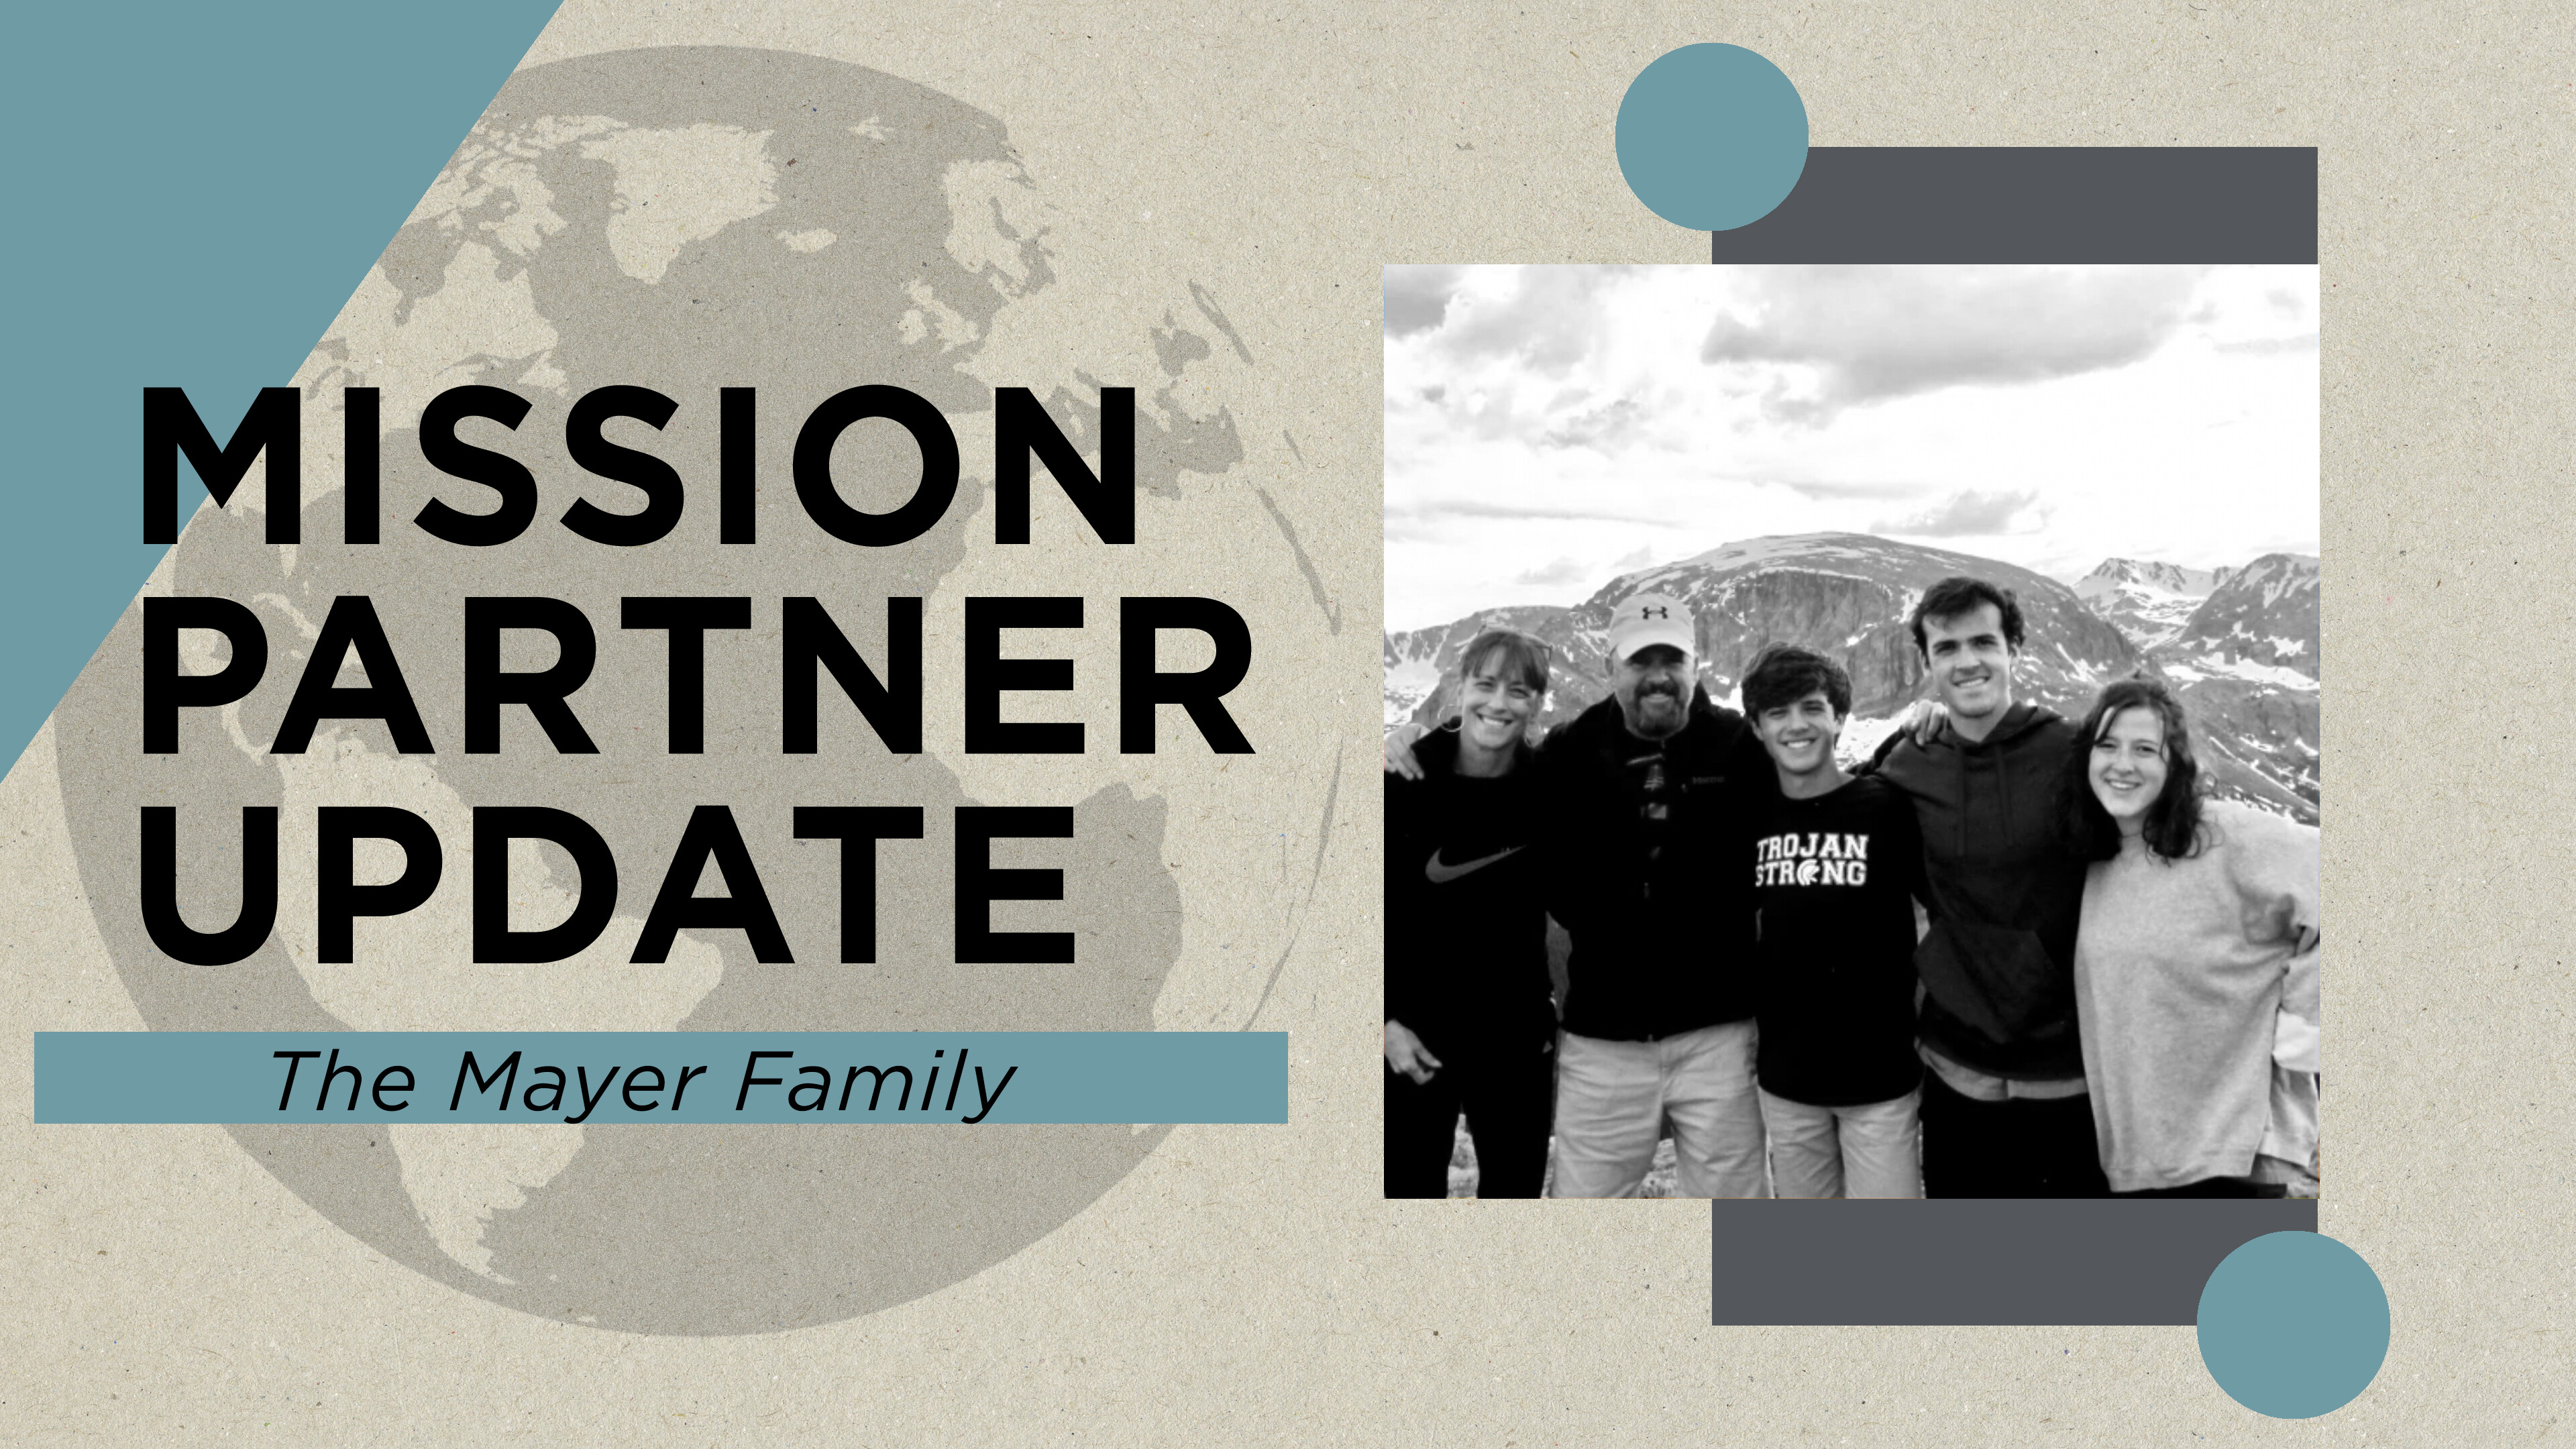 Mission Partner Update - The Mayers